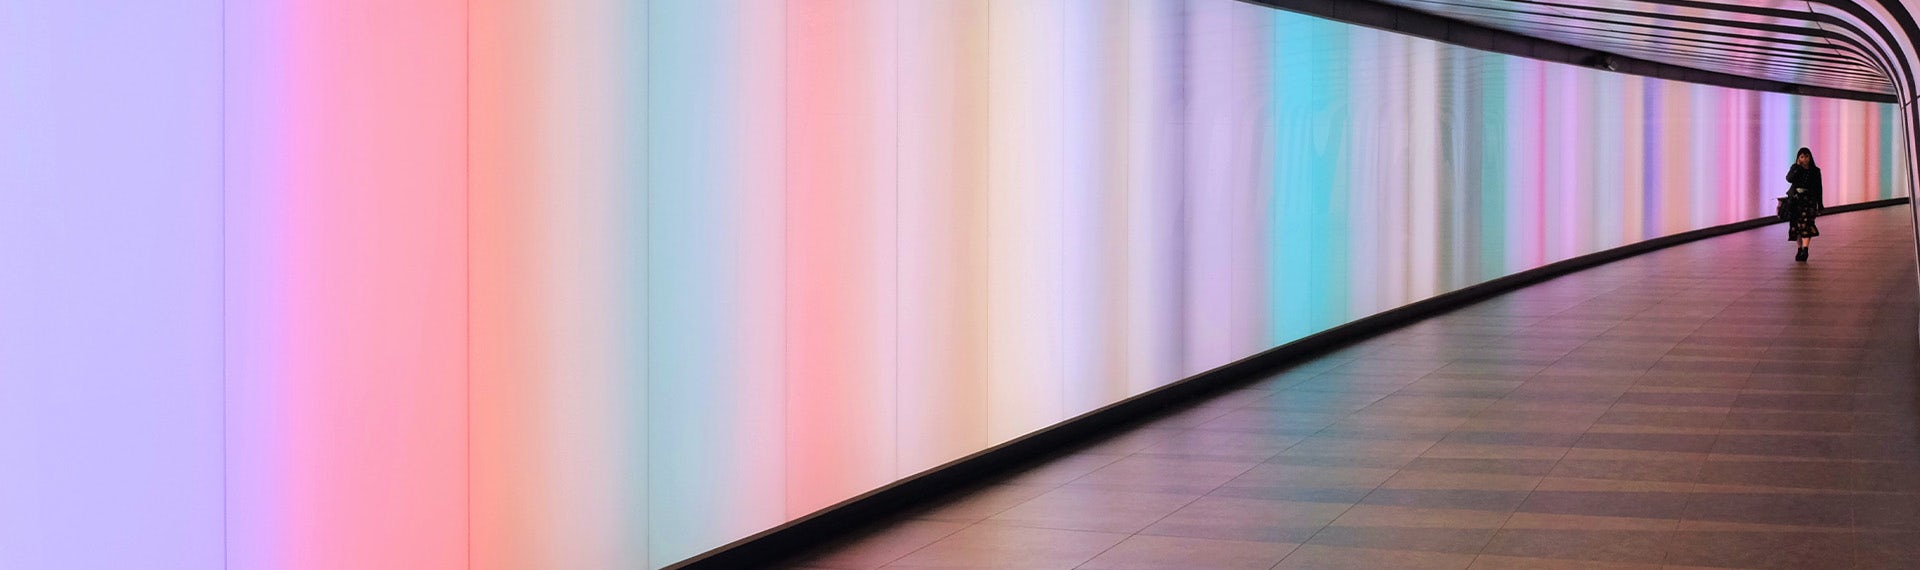 A person walking down a hallway with a rainbow colored wall.